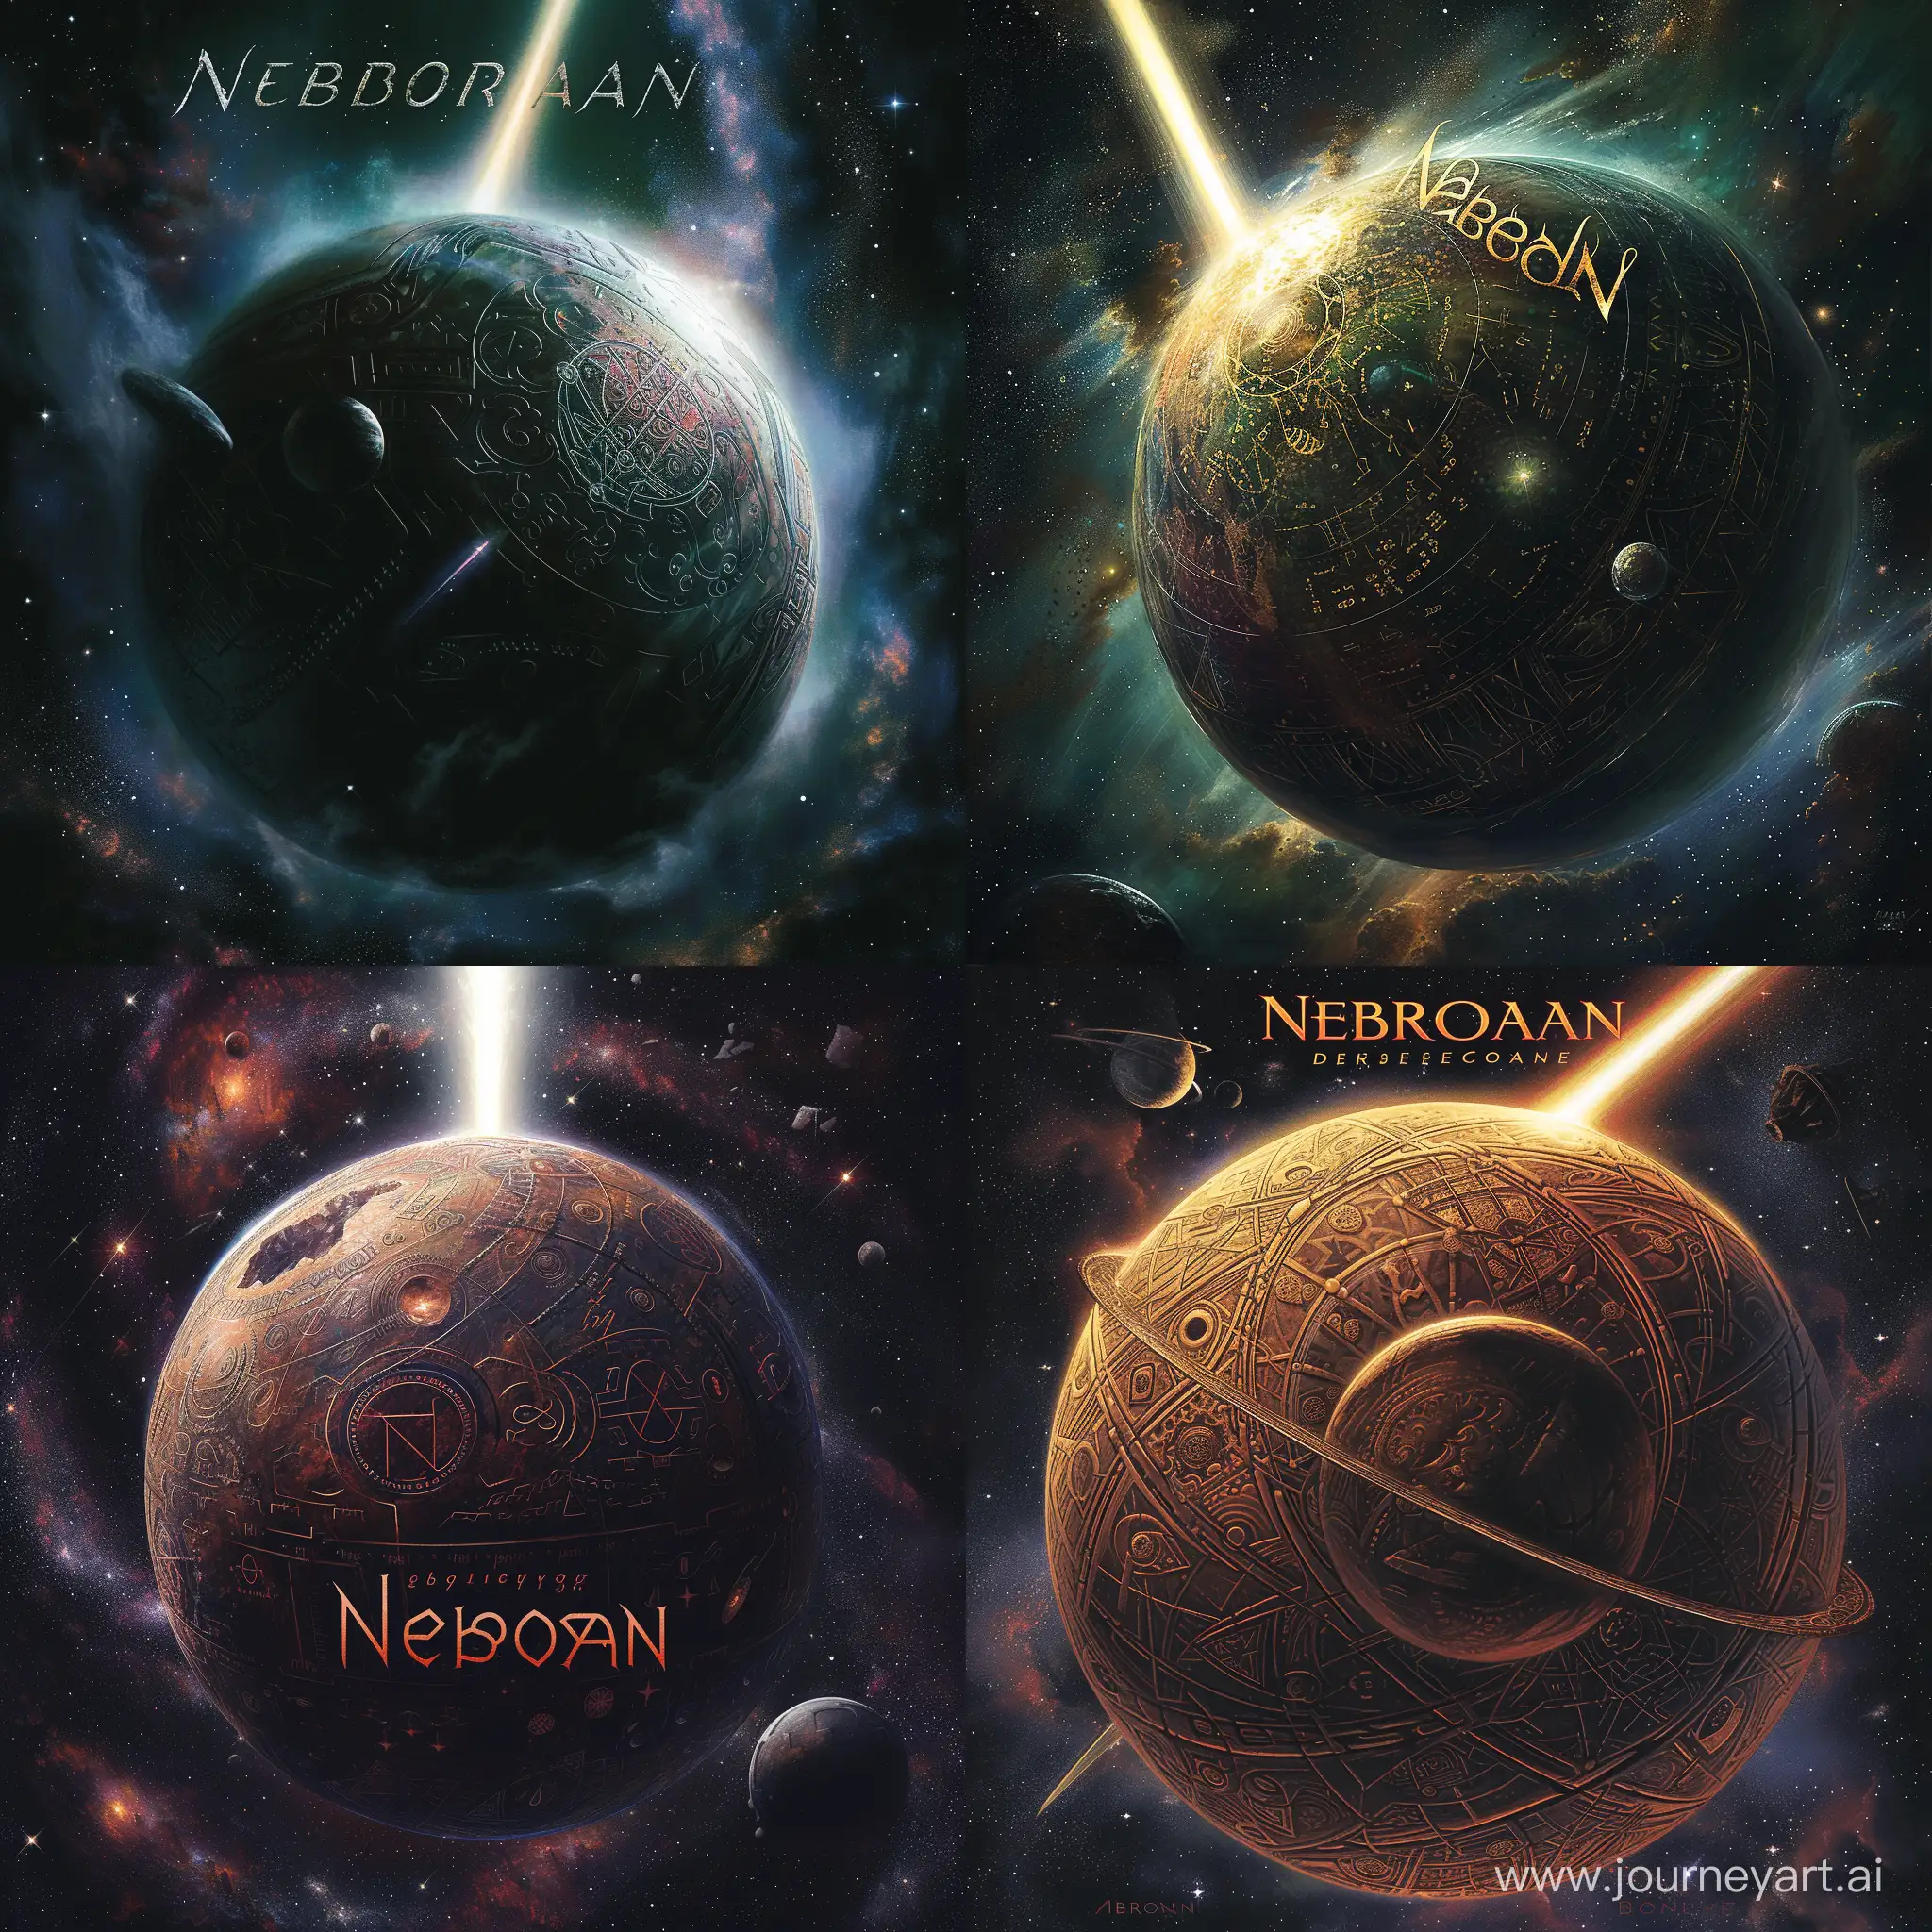 Enigmatic-Cosmic-Sphere-Surrounded-by-Stars-Cover-Art-for-Nebroan